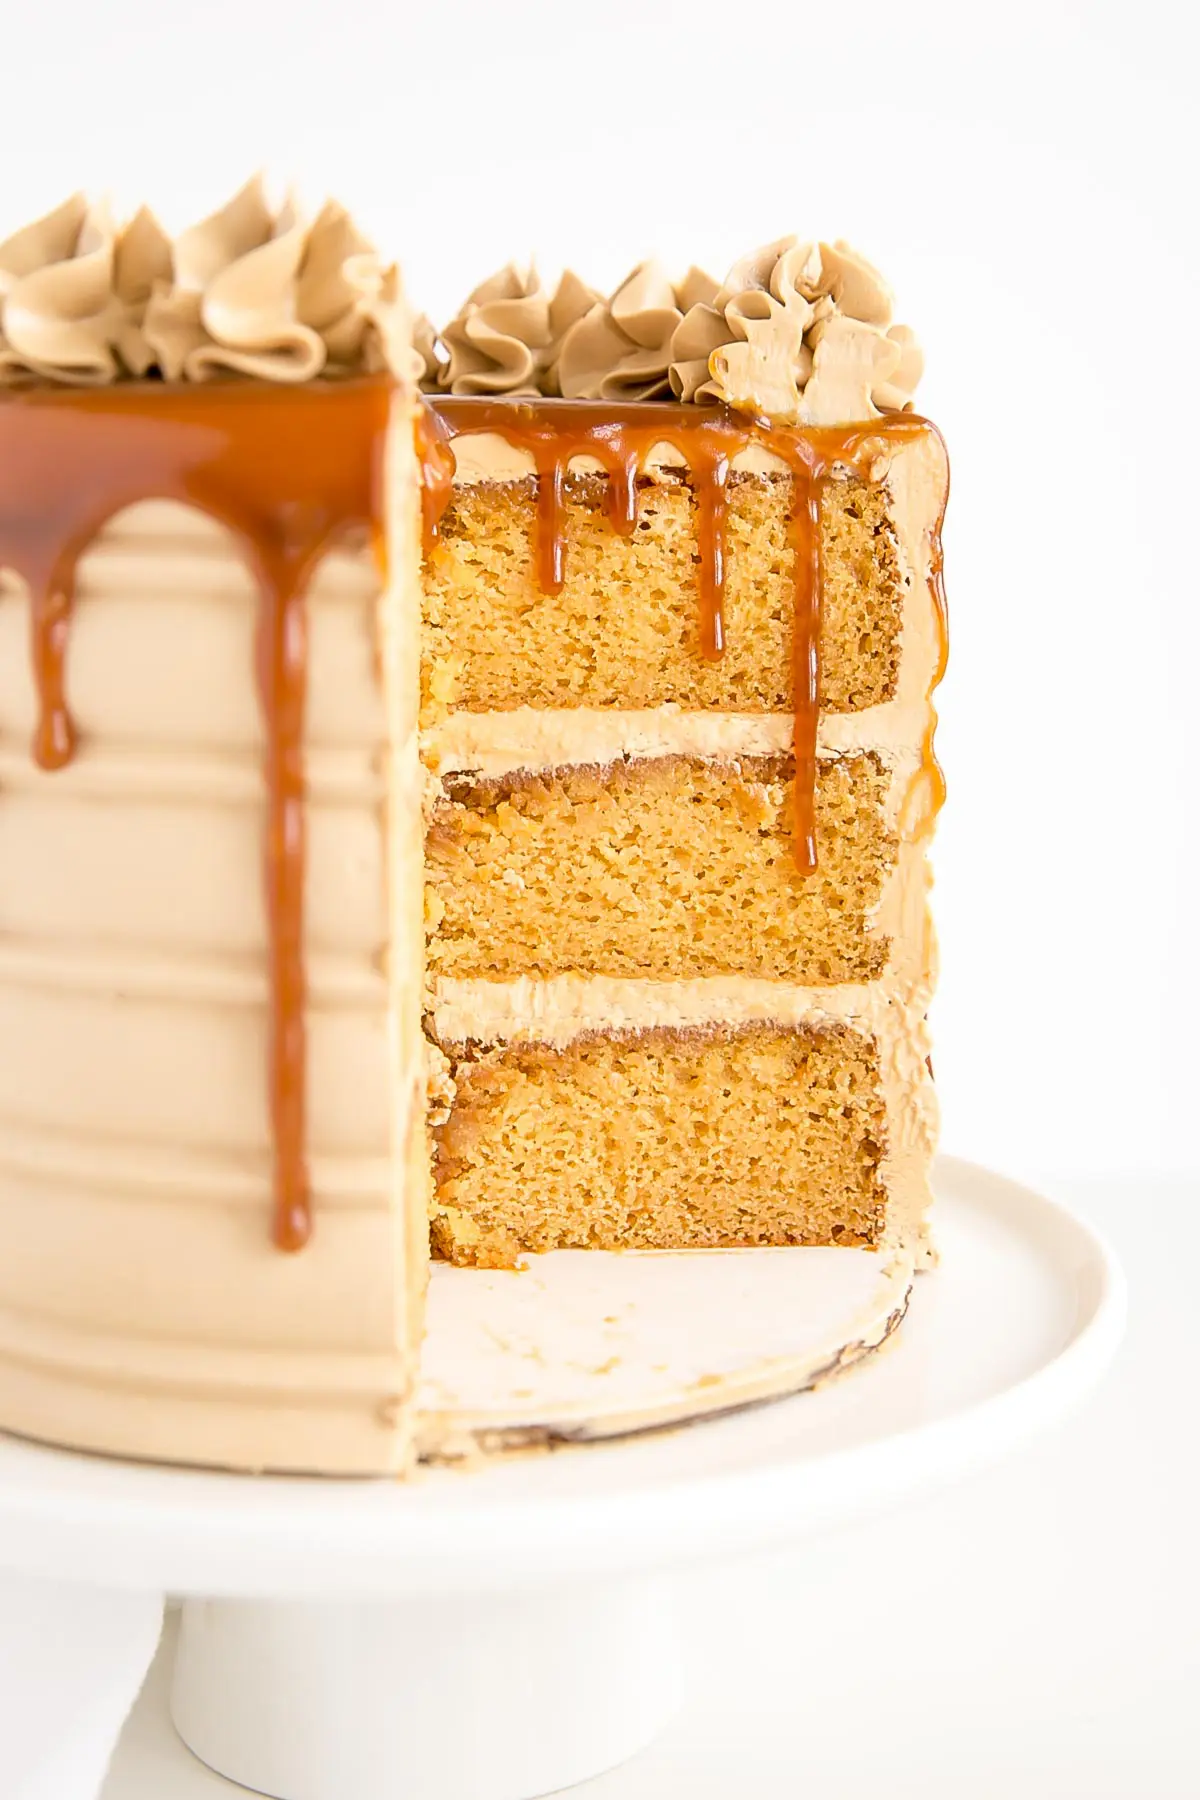 Cross section of a caramel cake with caramel dripping down.